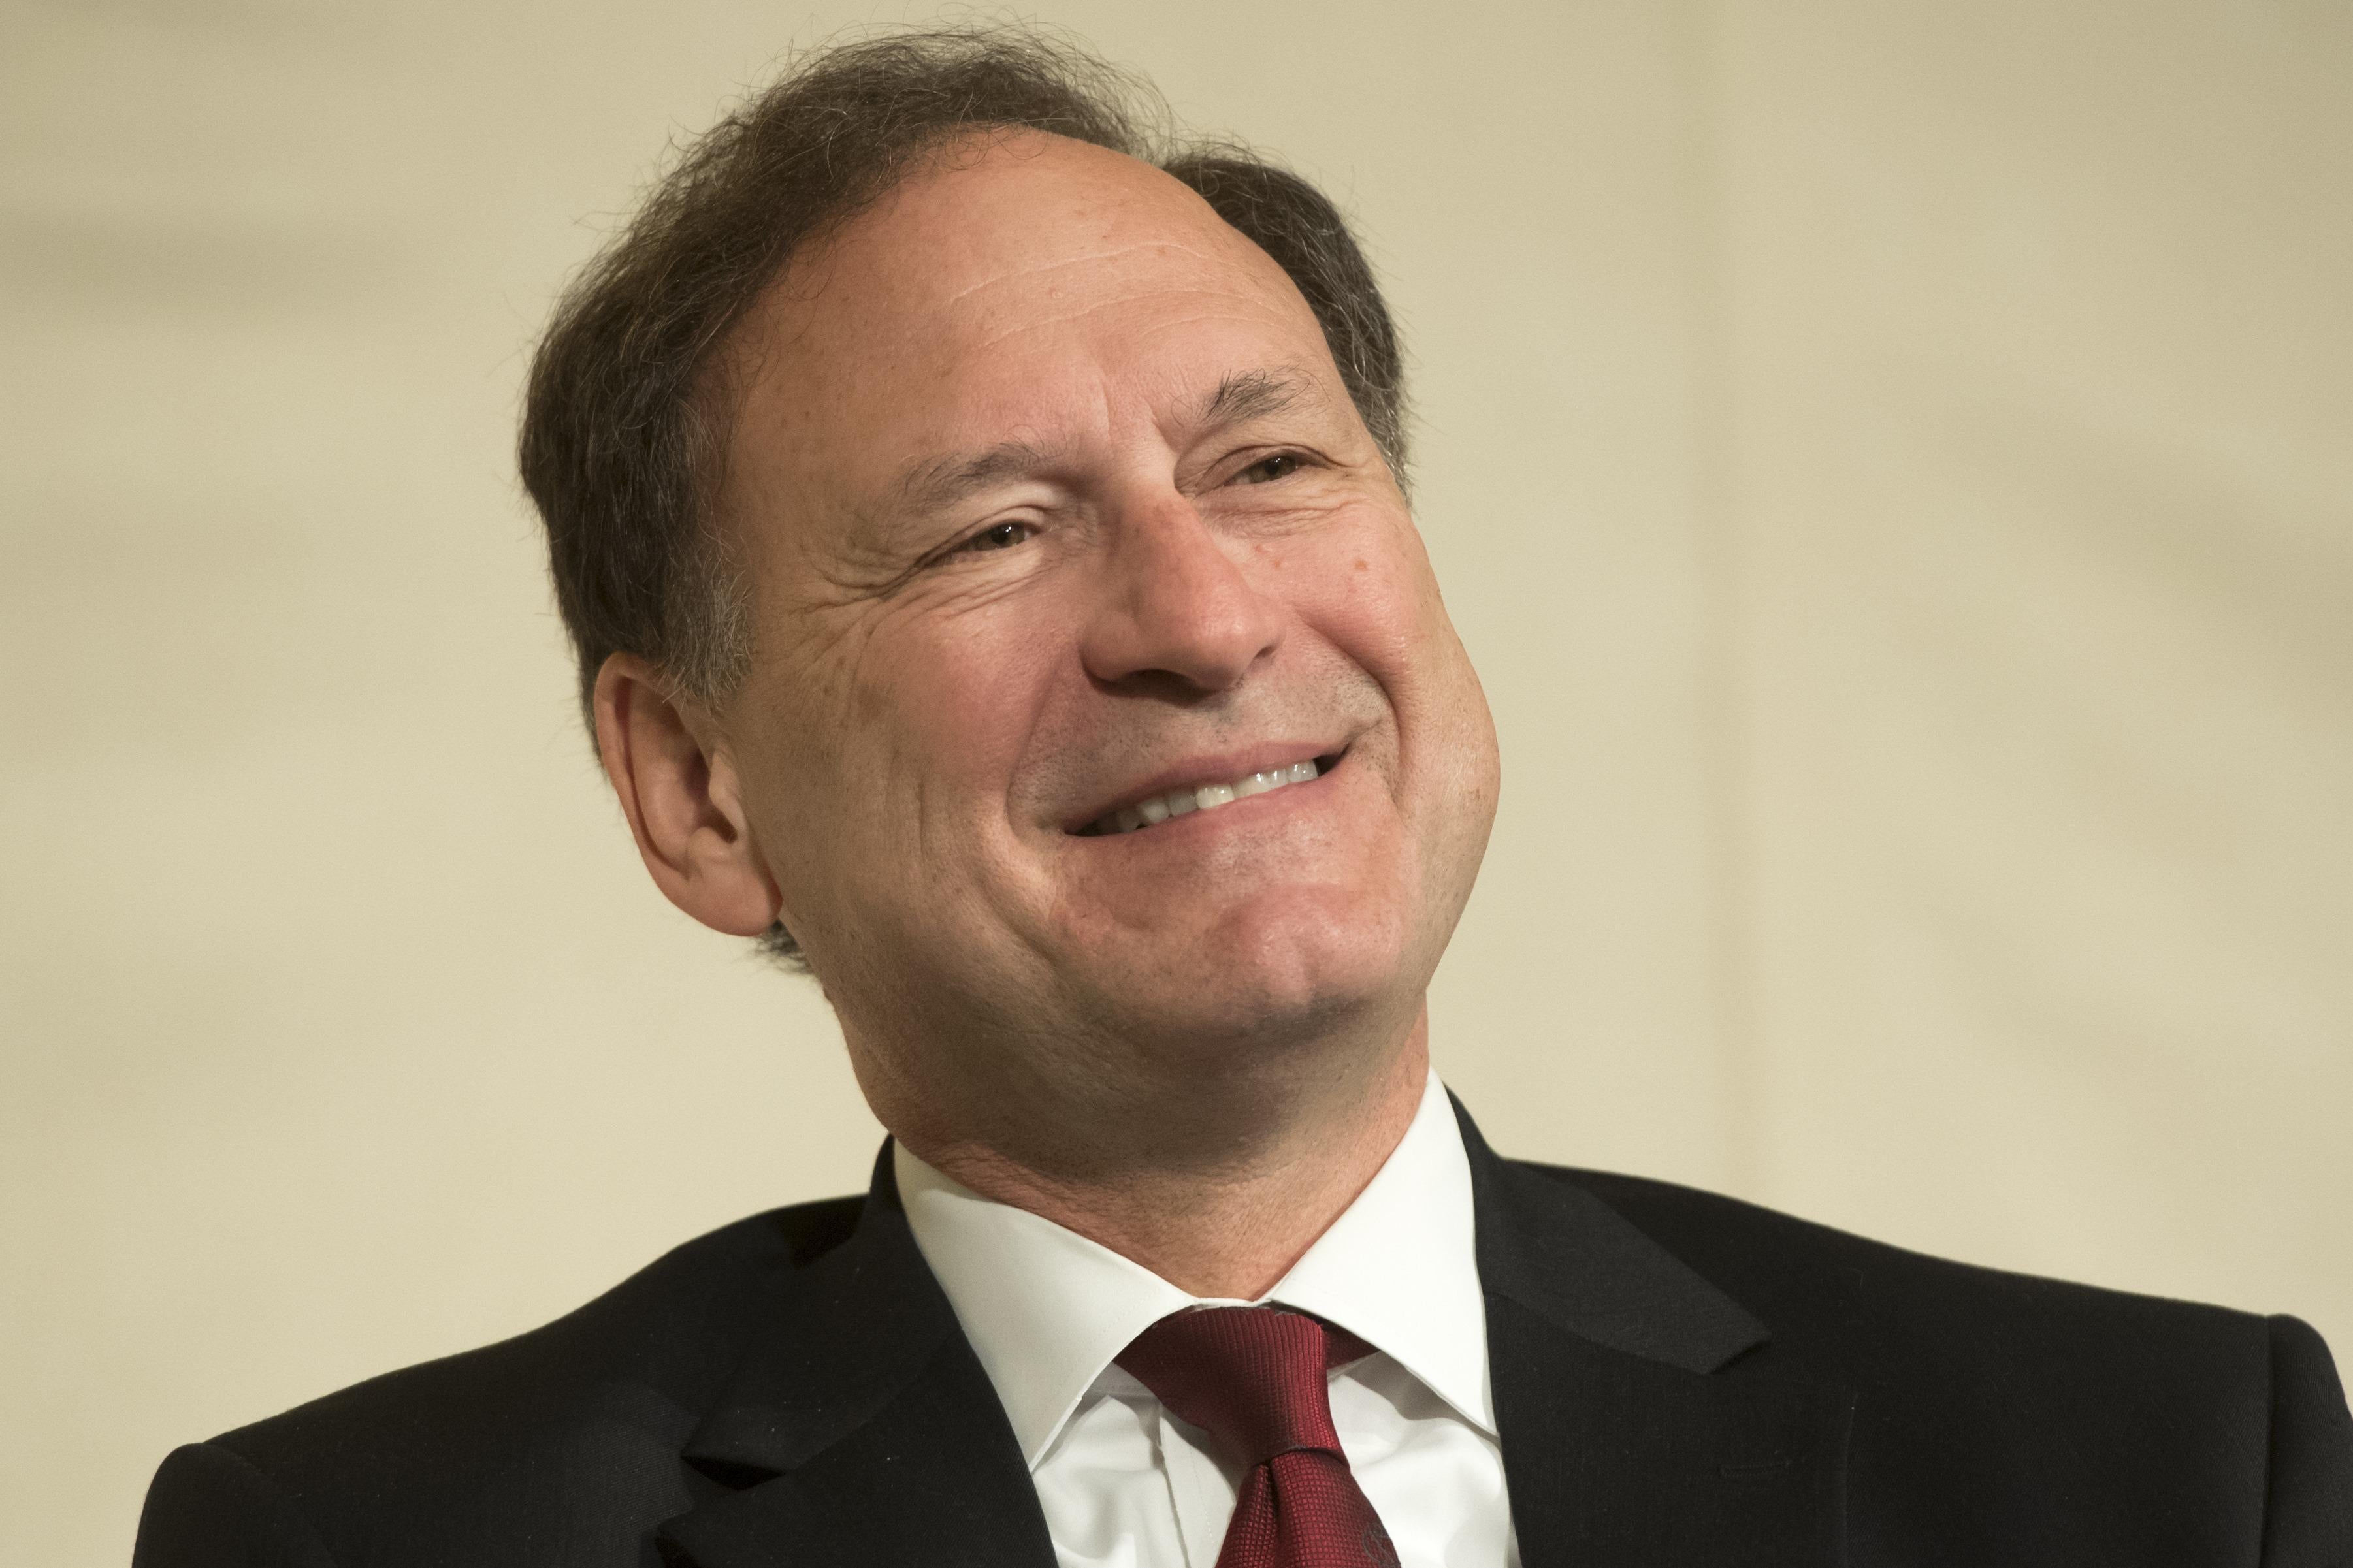 Associate Justice of the US Supreme Court Samuel Alito speaks during the American Bar Association's Section on International Law Conference in Washington, DC, April 27, 2017. / AFP PHOTO / SAUL LOEB        (Photo credit should read SAUL LOEB/AFP/Getty Images)